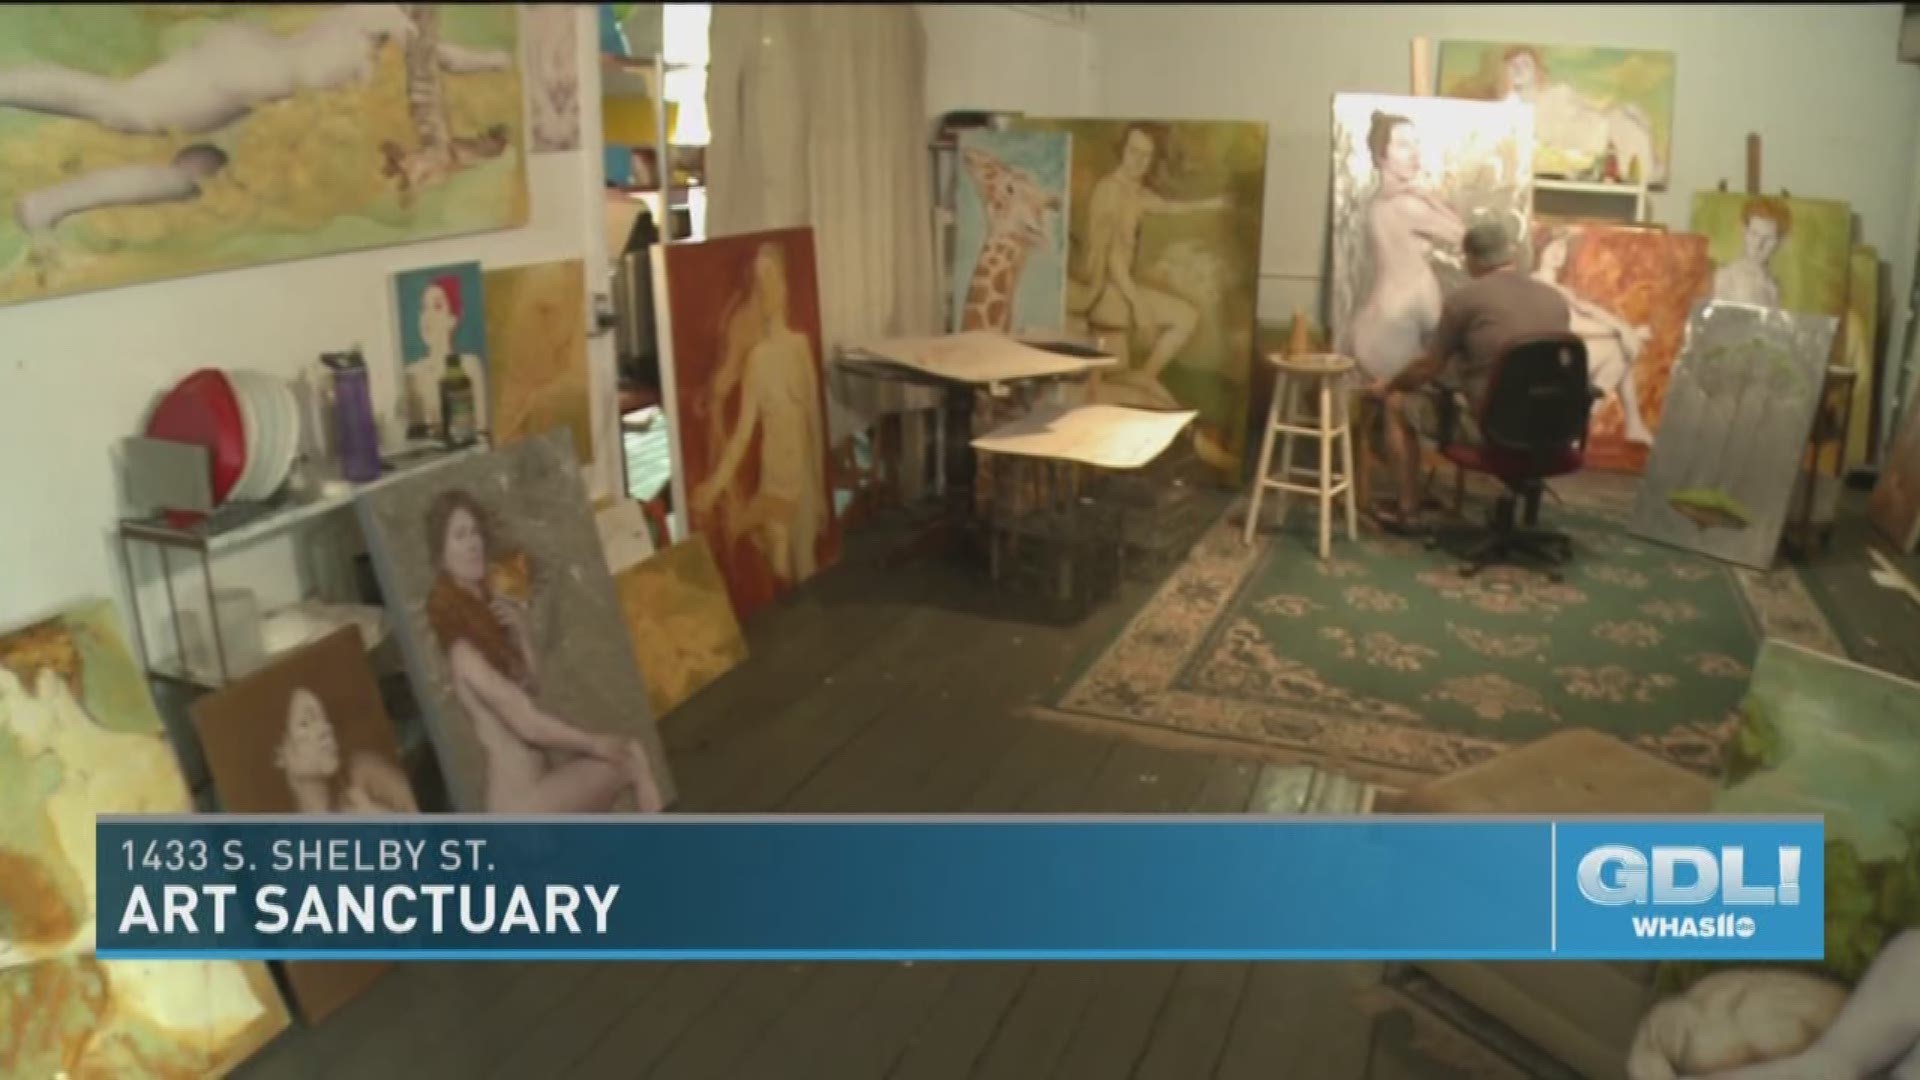 Art Sanctuary is located at 1433 S Shelby Street in Louisville, KY. For more information, visit www.art-sanctuary.org.